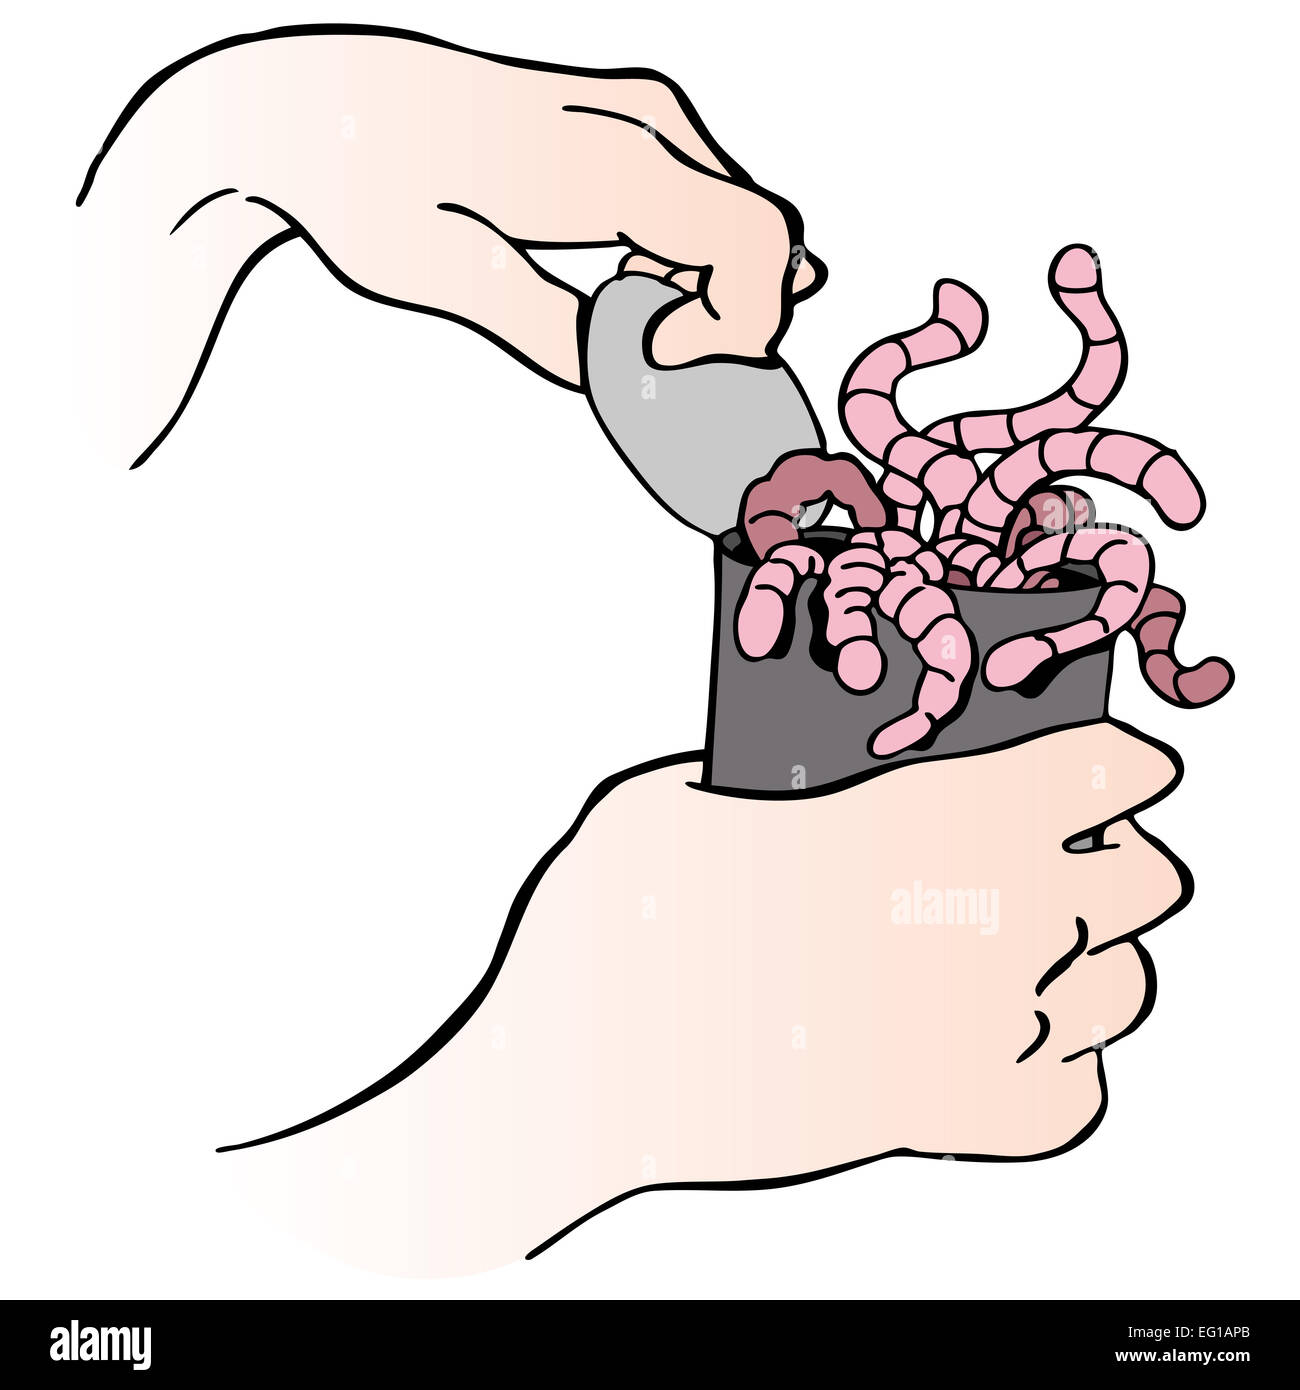 An image of hands opening a can of worms. Stock Photo